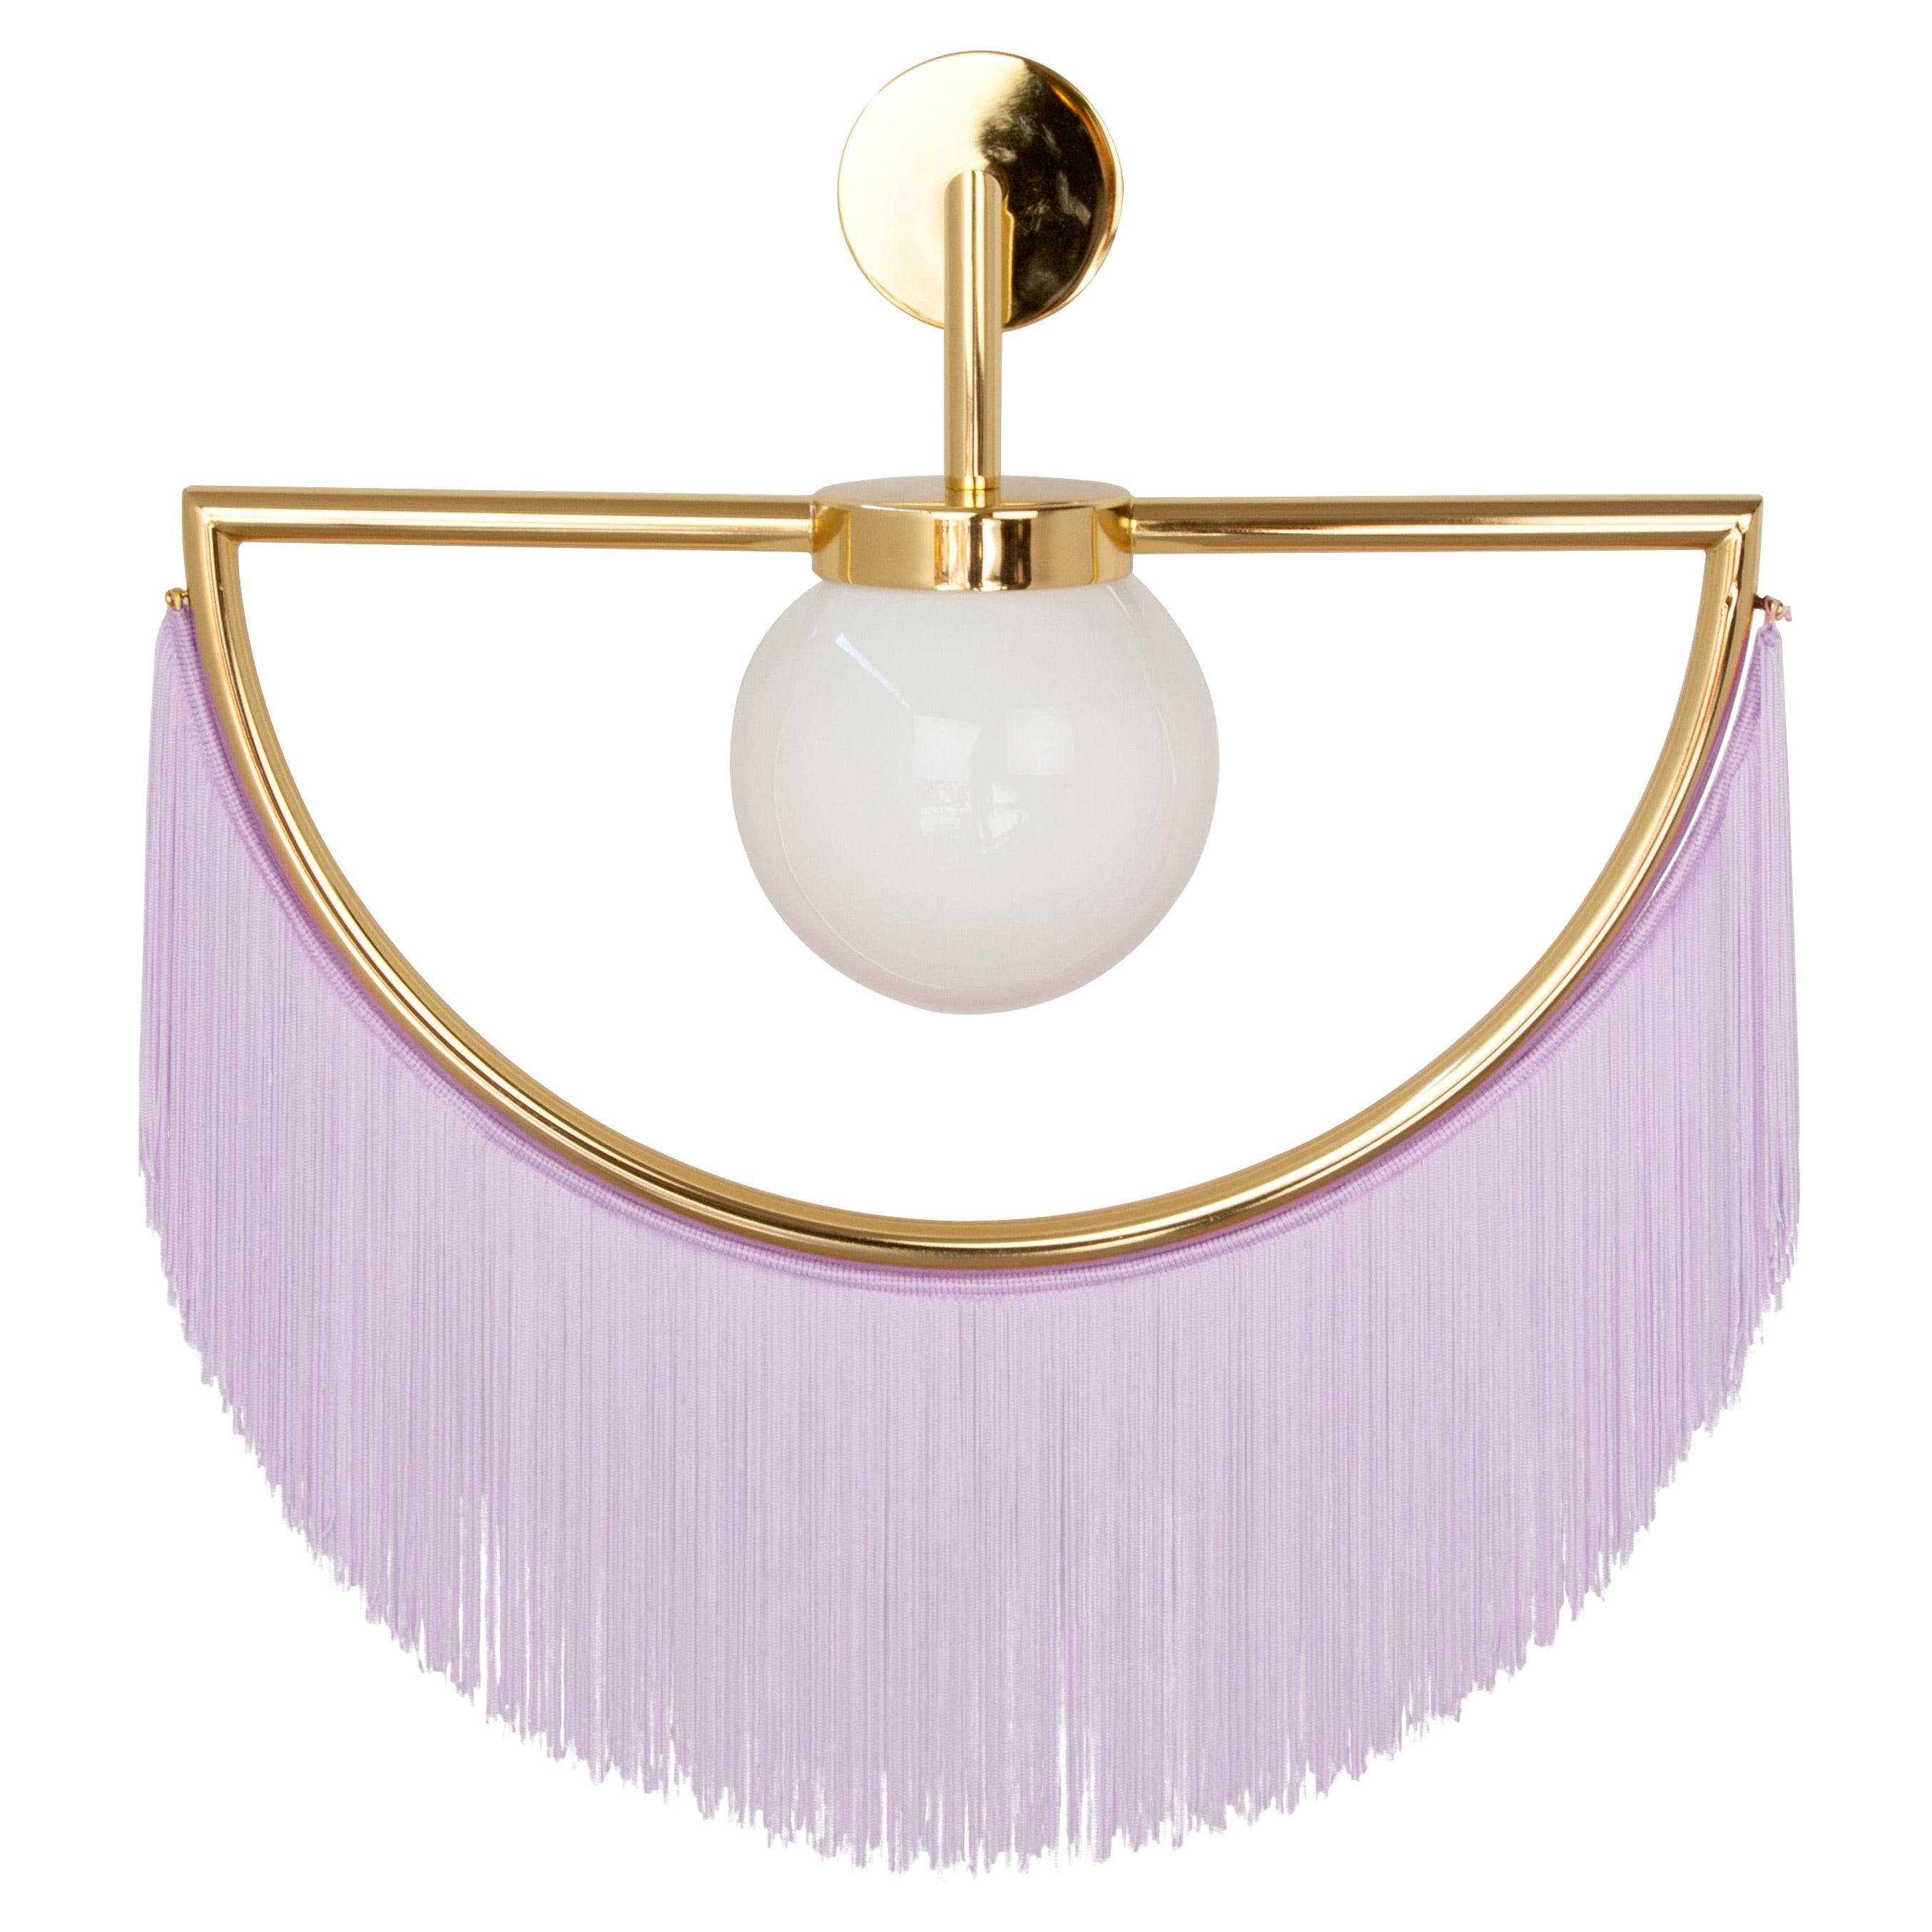 Wink Wall Lamp Large by Houtique, Light Purple